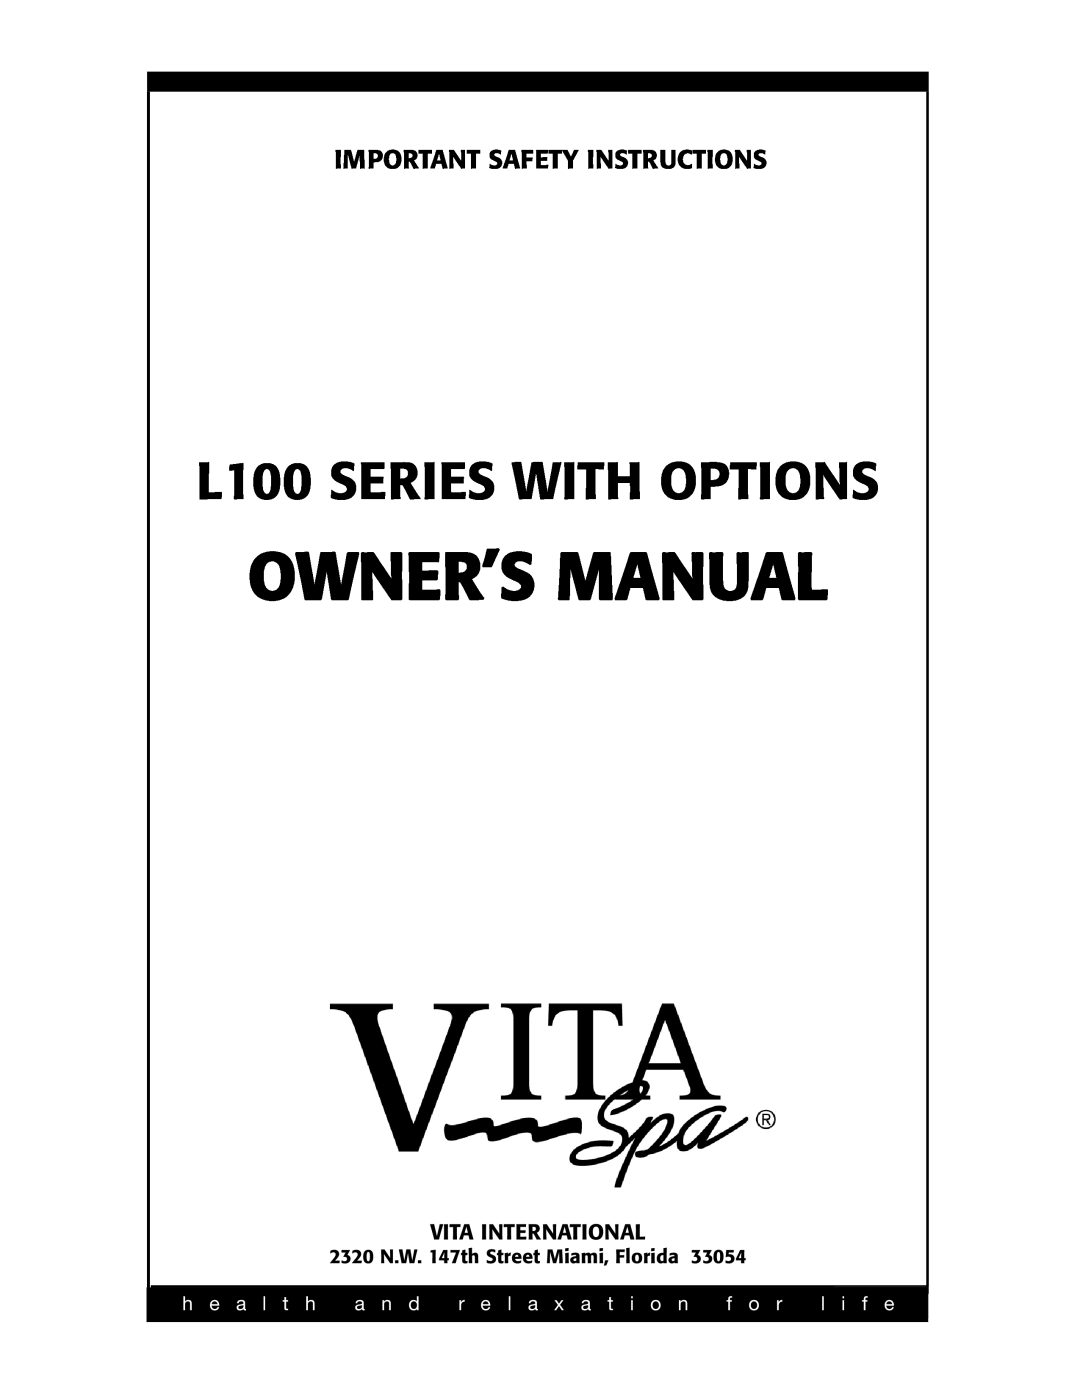 Vita Spa owner manual L100 SERIES WITH OPTIONS, Important Safety Instructions, Vita International, h e a l t h, a n d 